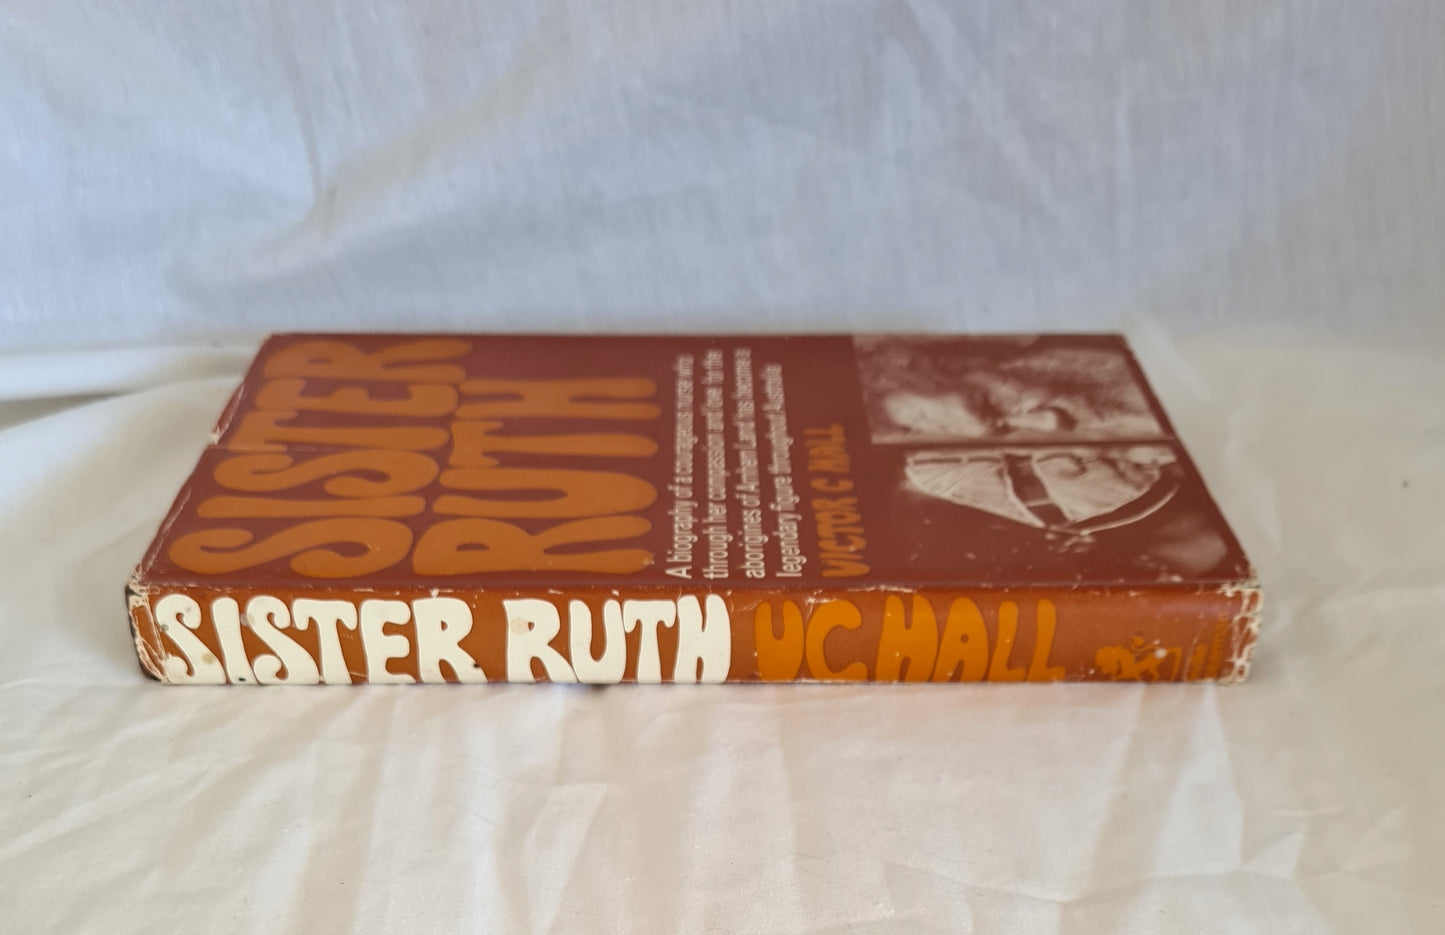 Sister Ruth by Victor C. Hall